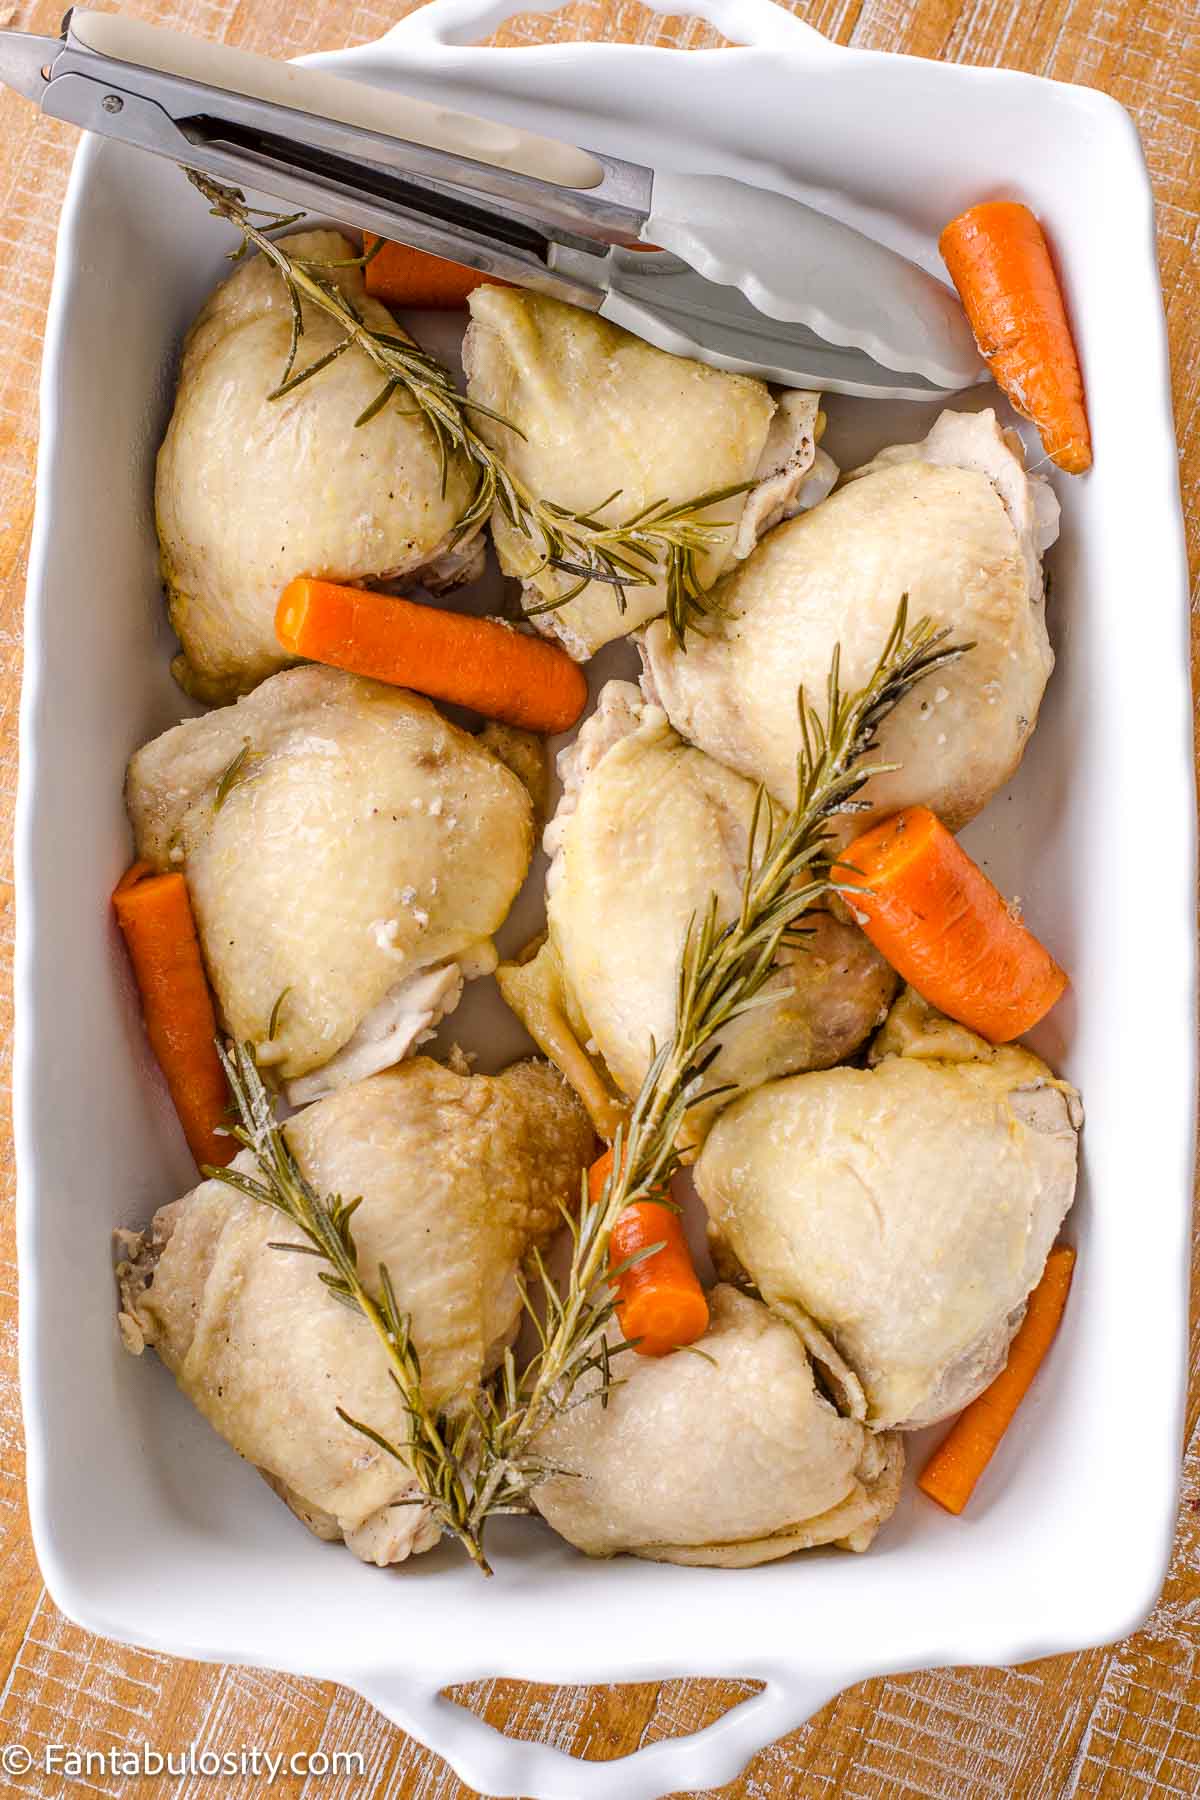 Boiled chicken thighs in baking dish.